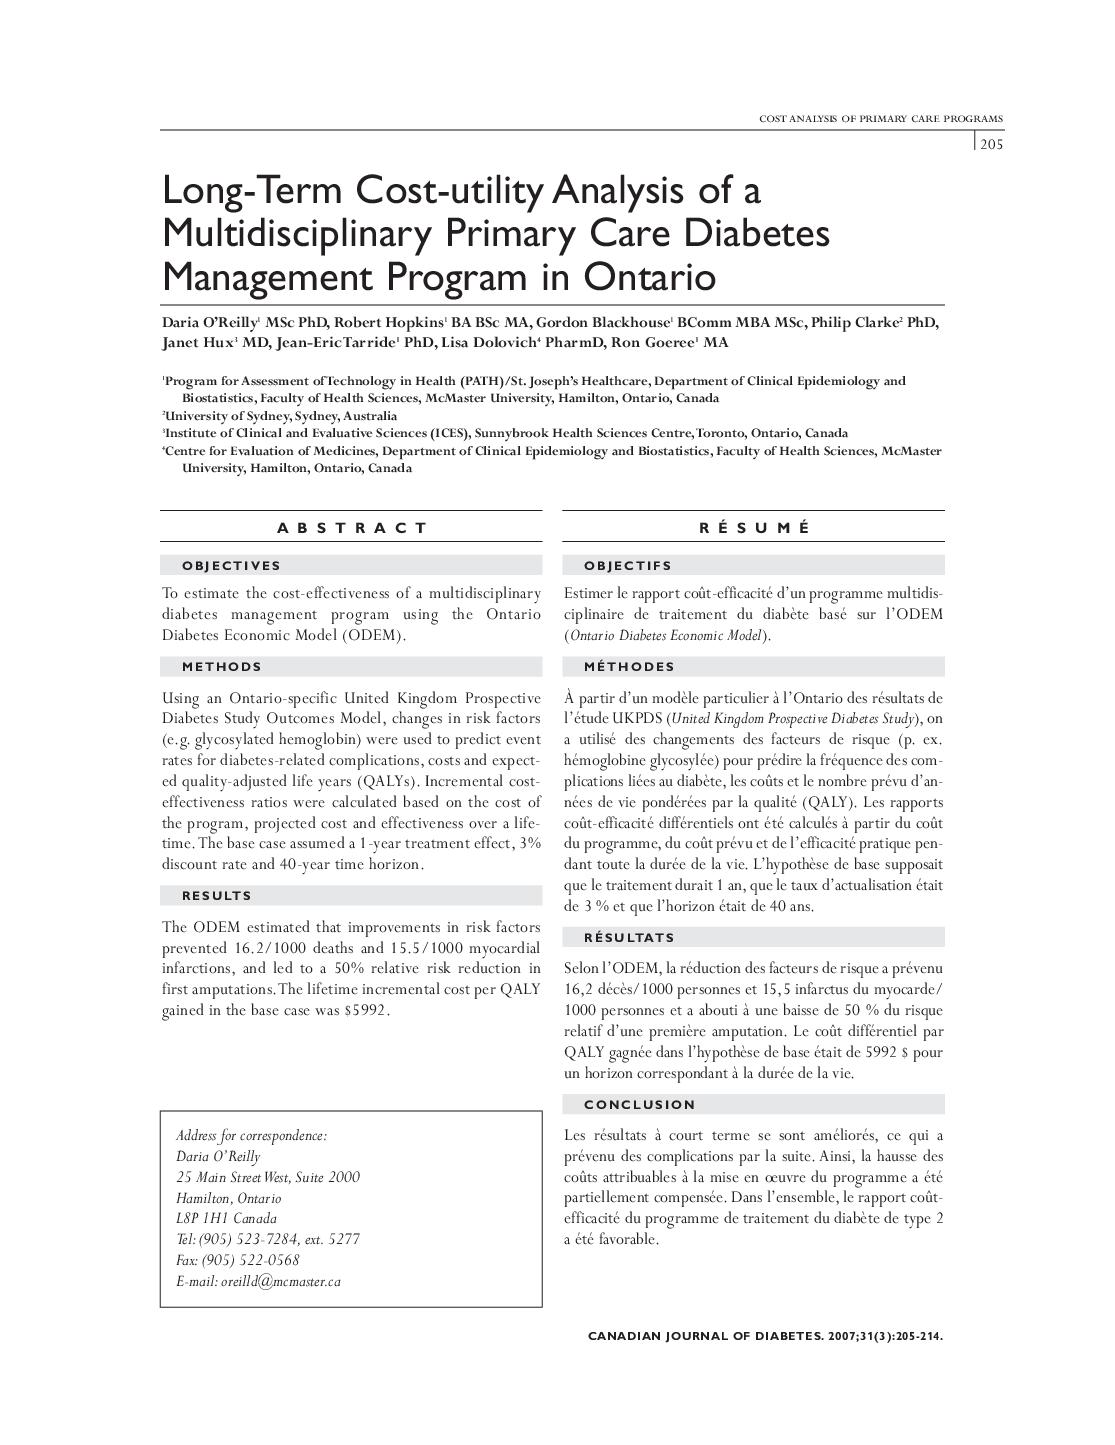 Long-Term Cost-utility Analysis of a Multidisciplinary Primary Care Diabetes Management Program in Ontario